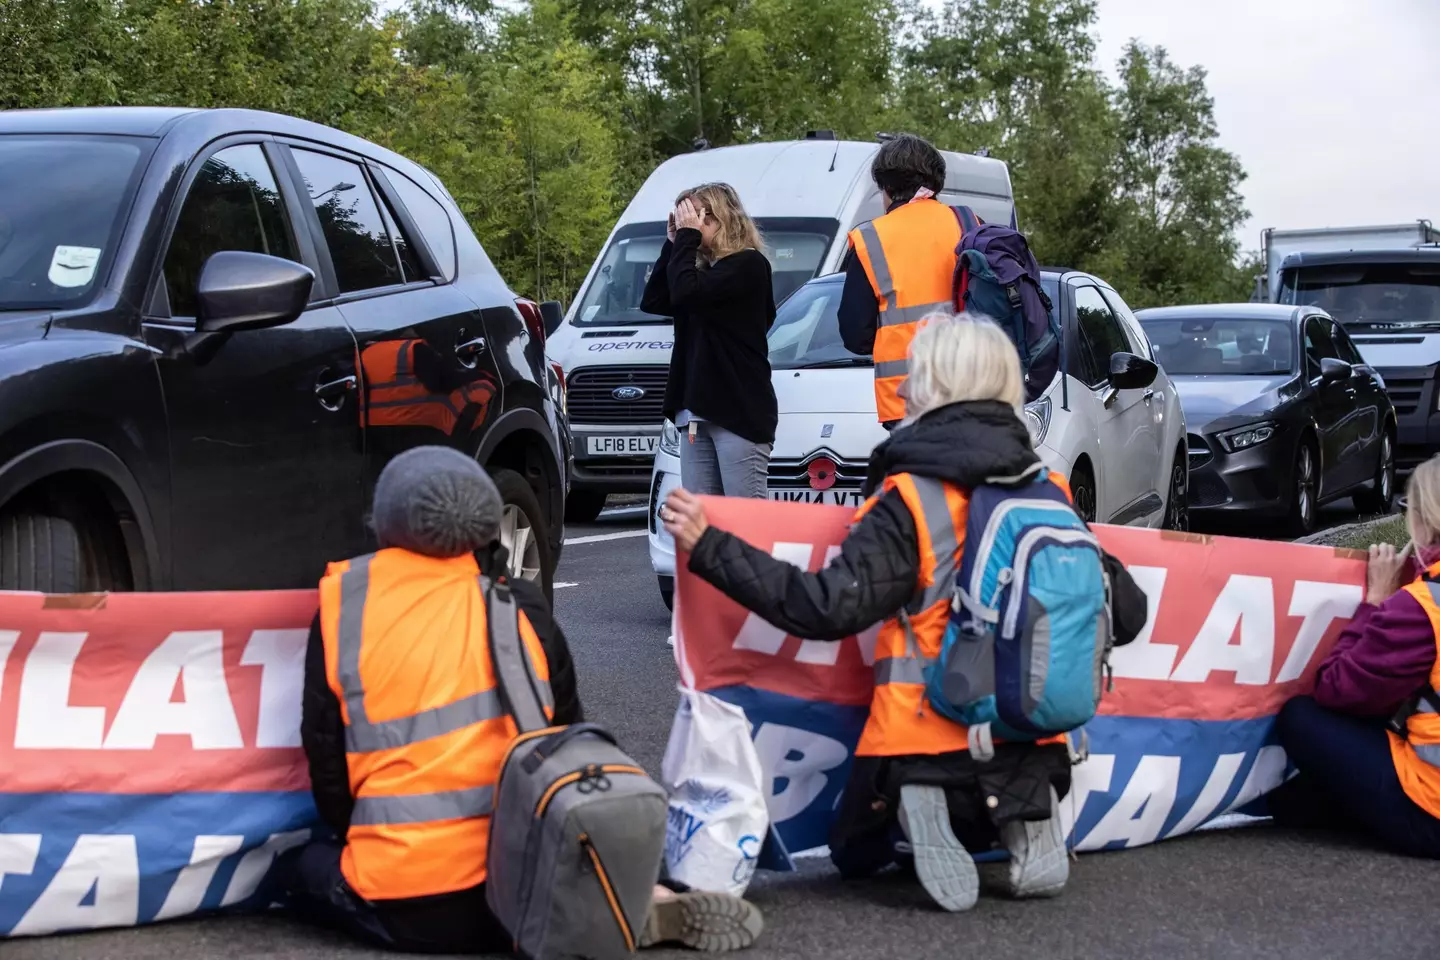 Insulate Britain protesters have blocked motorways in recent times.